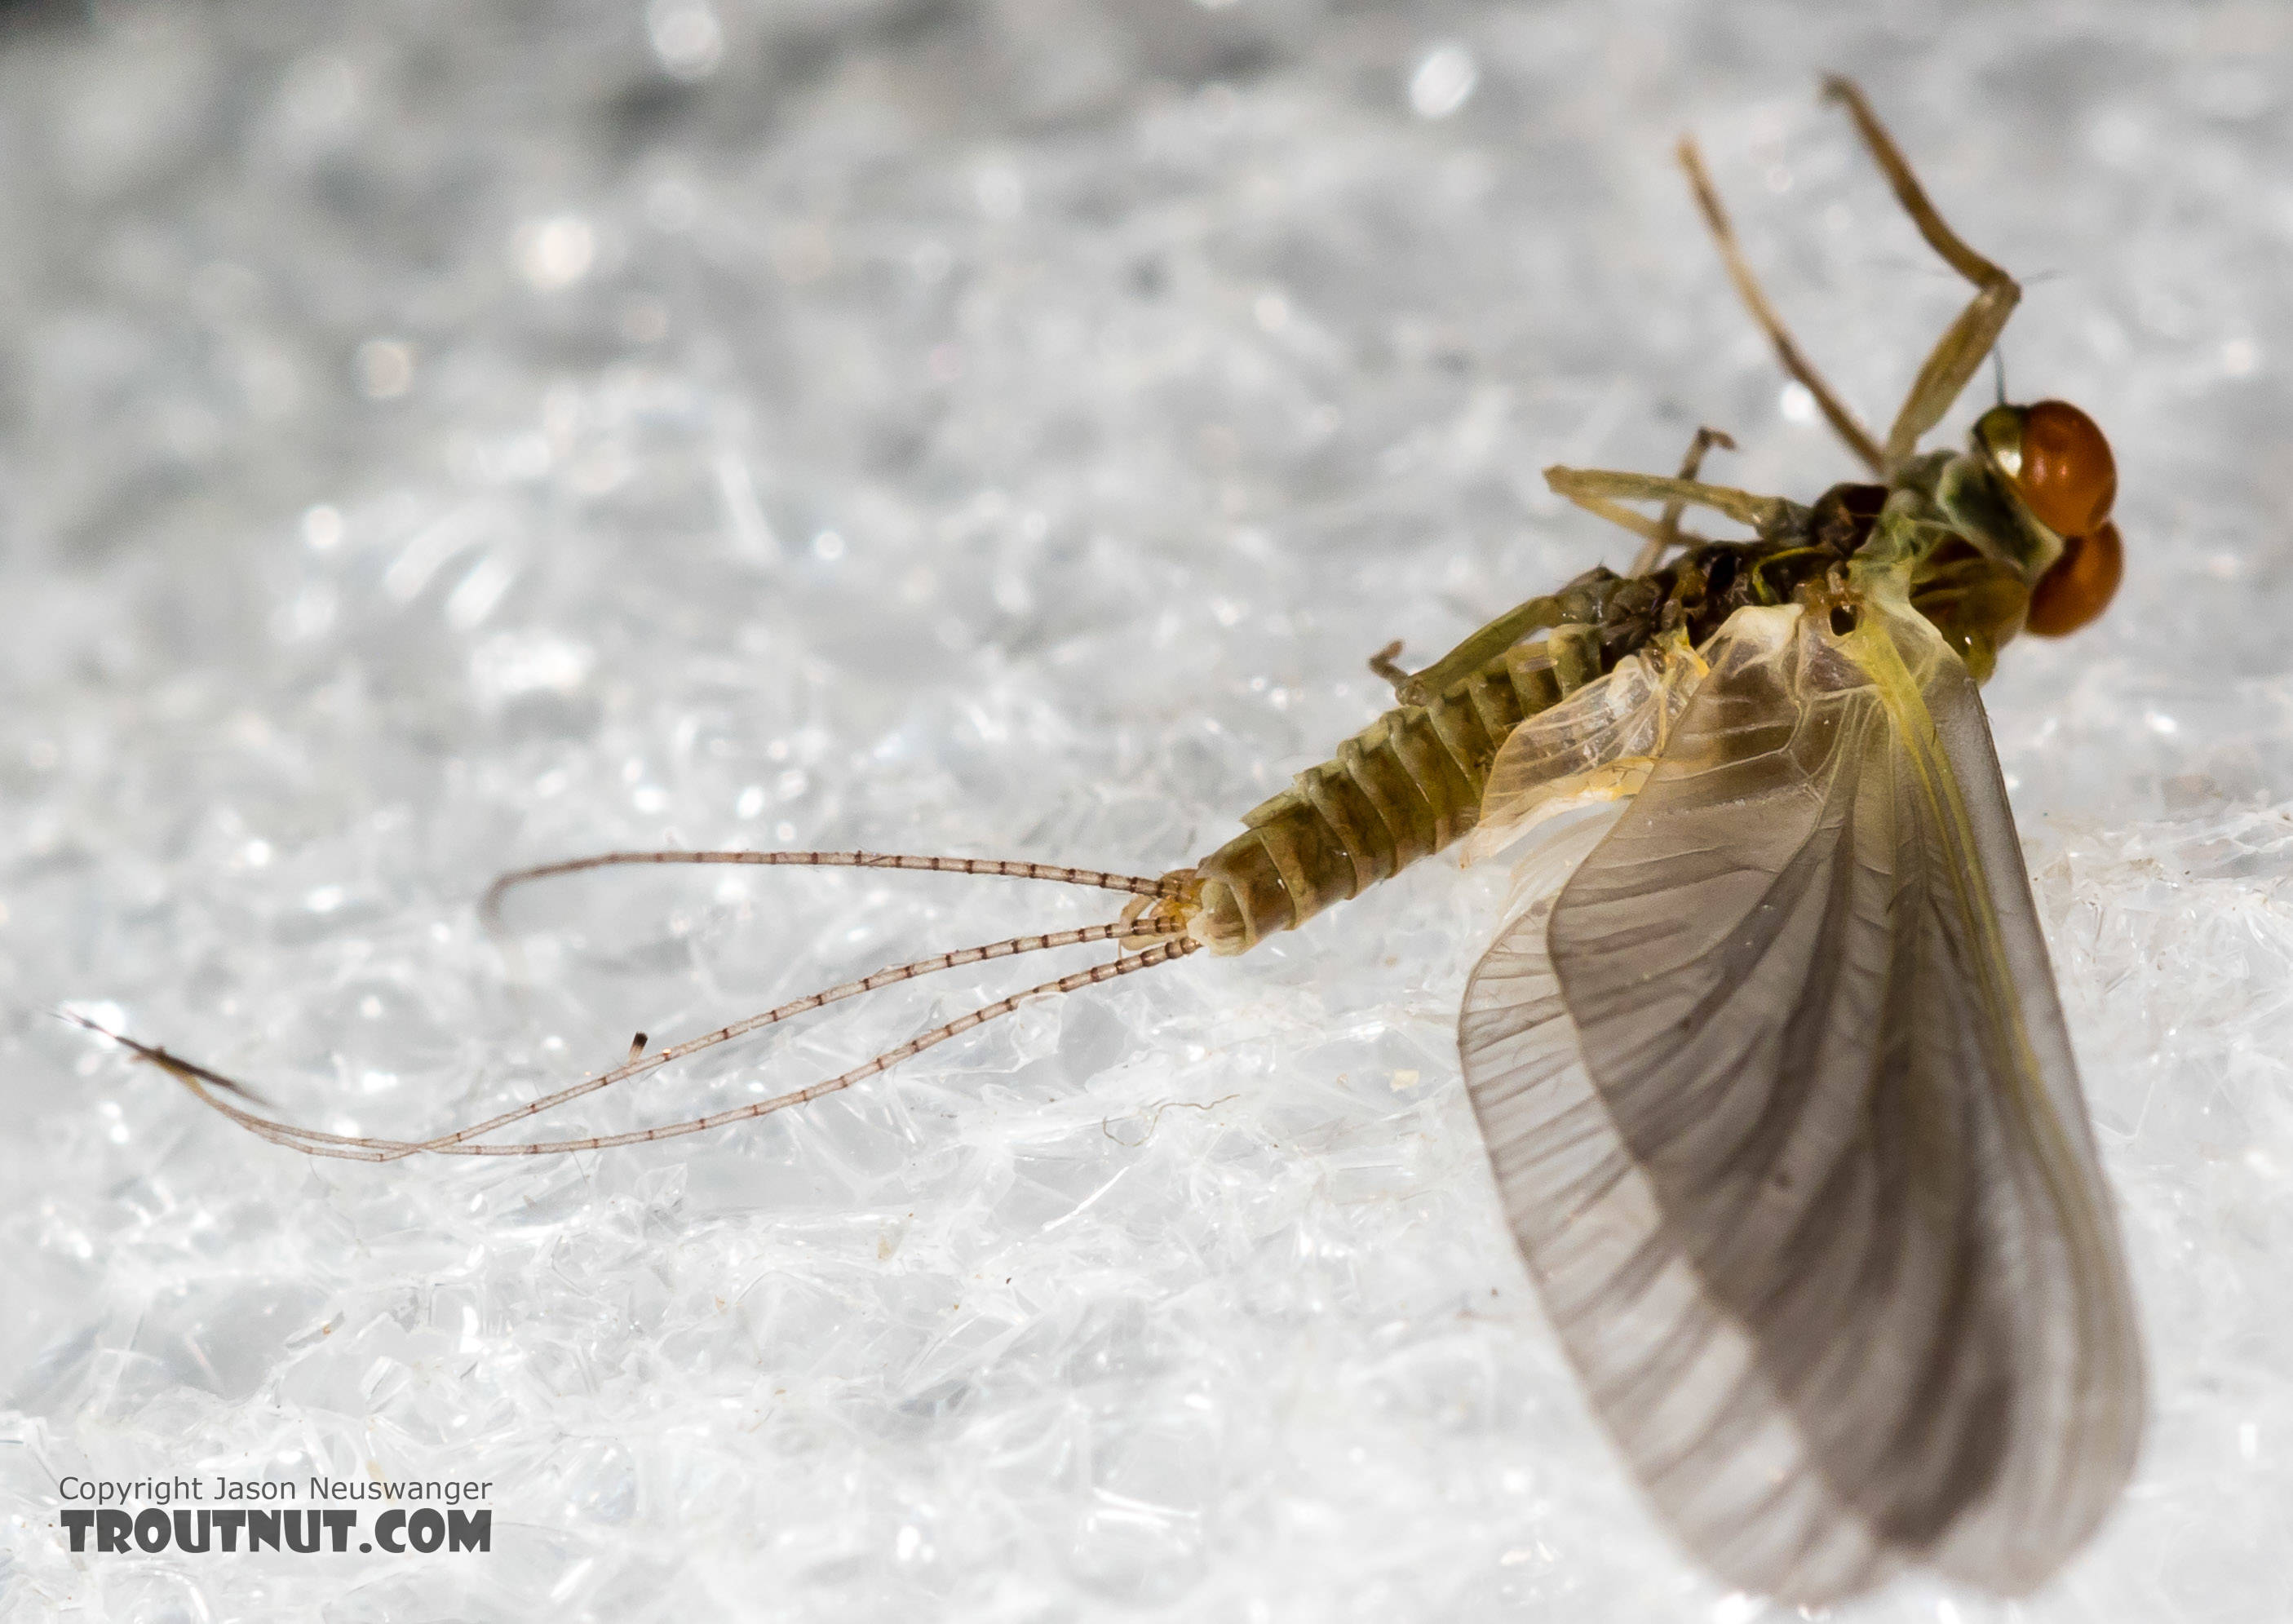 Male Ephemerellidae (Hendricksons, Sulphurs, PMDs, BWOs) Mayfly Dun from the Henry's Fork of the Snake River in Idaho